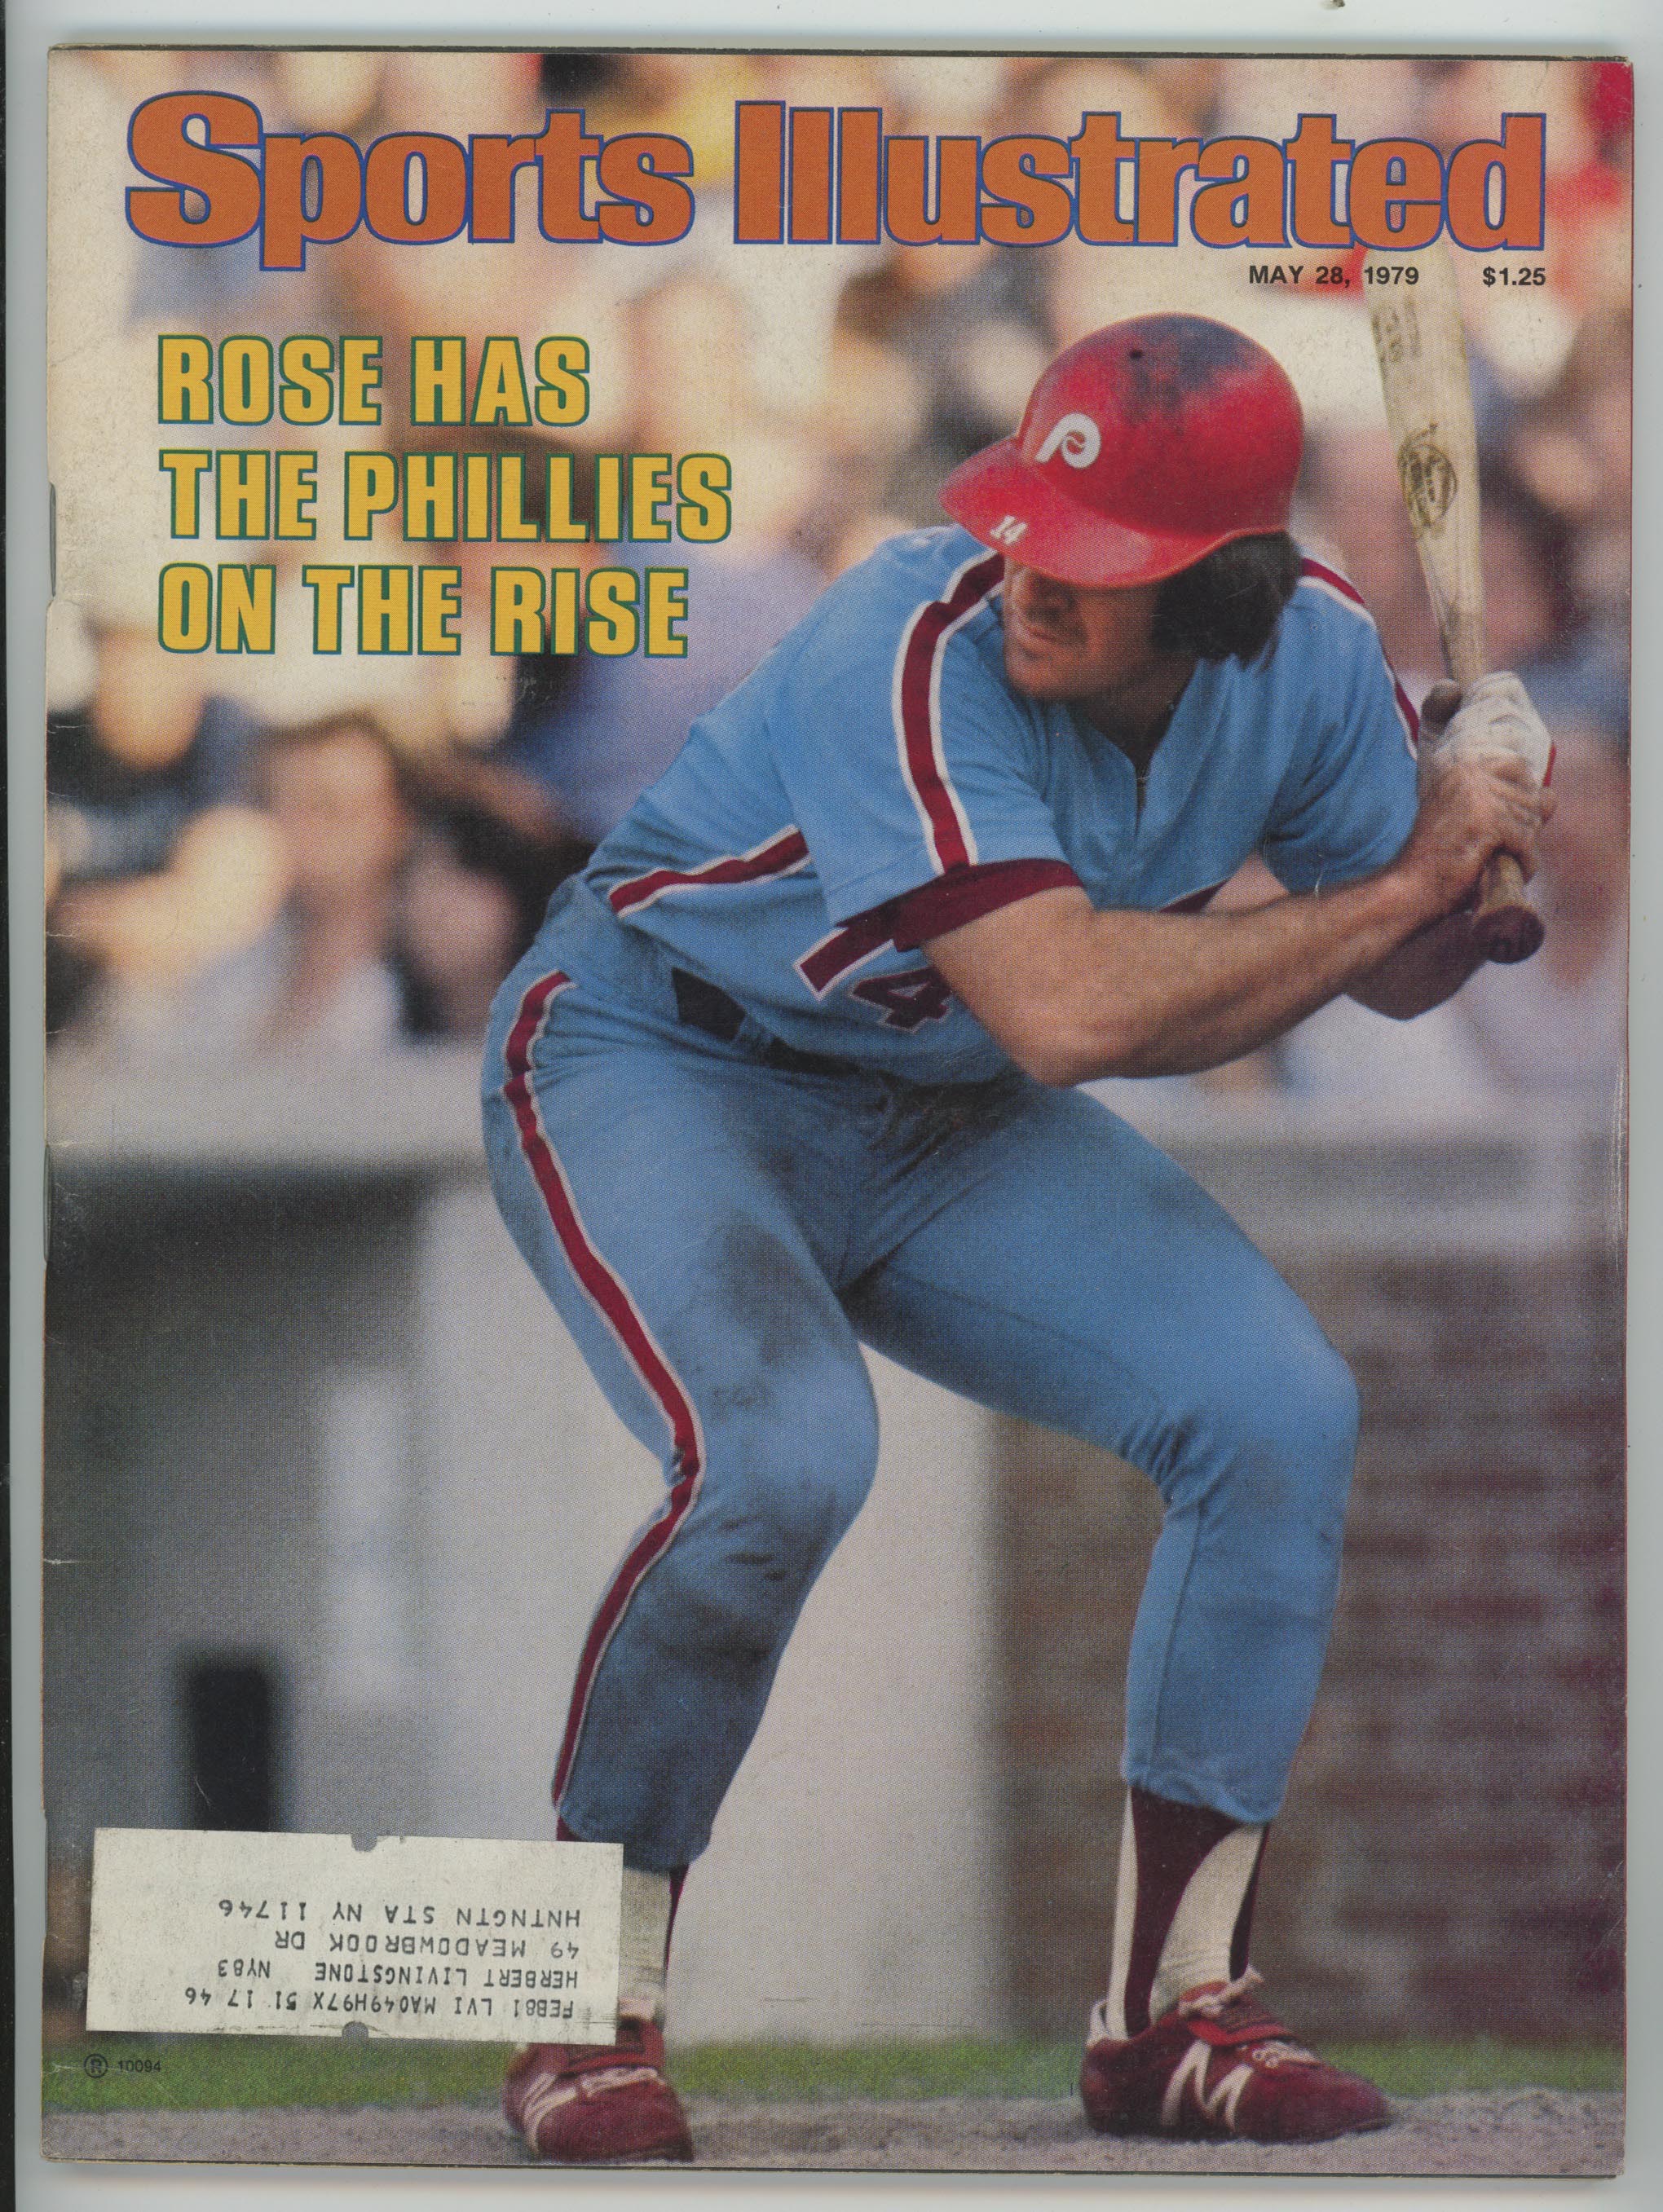 Pete Rose Philadelphia Phillies "Rose Has the Phillies on the Rise" 5/28/79  Sports Illustrated ML